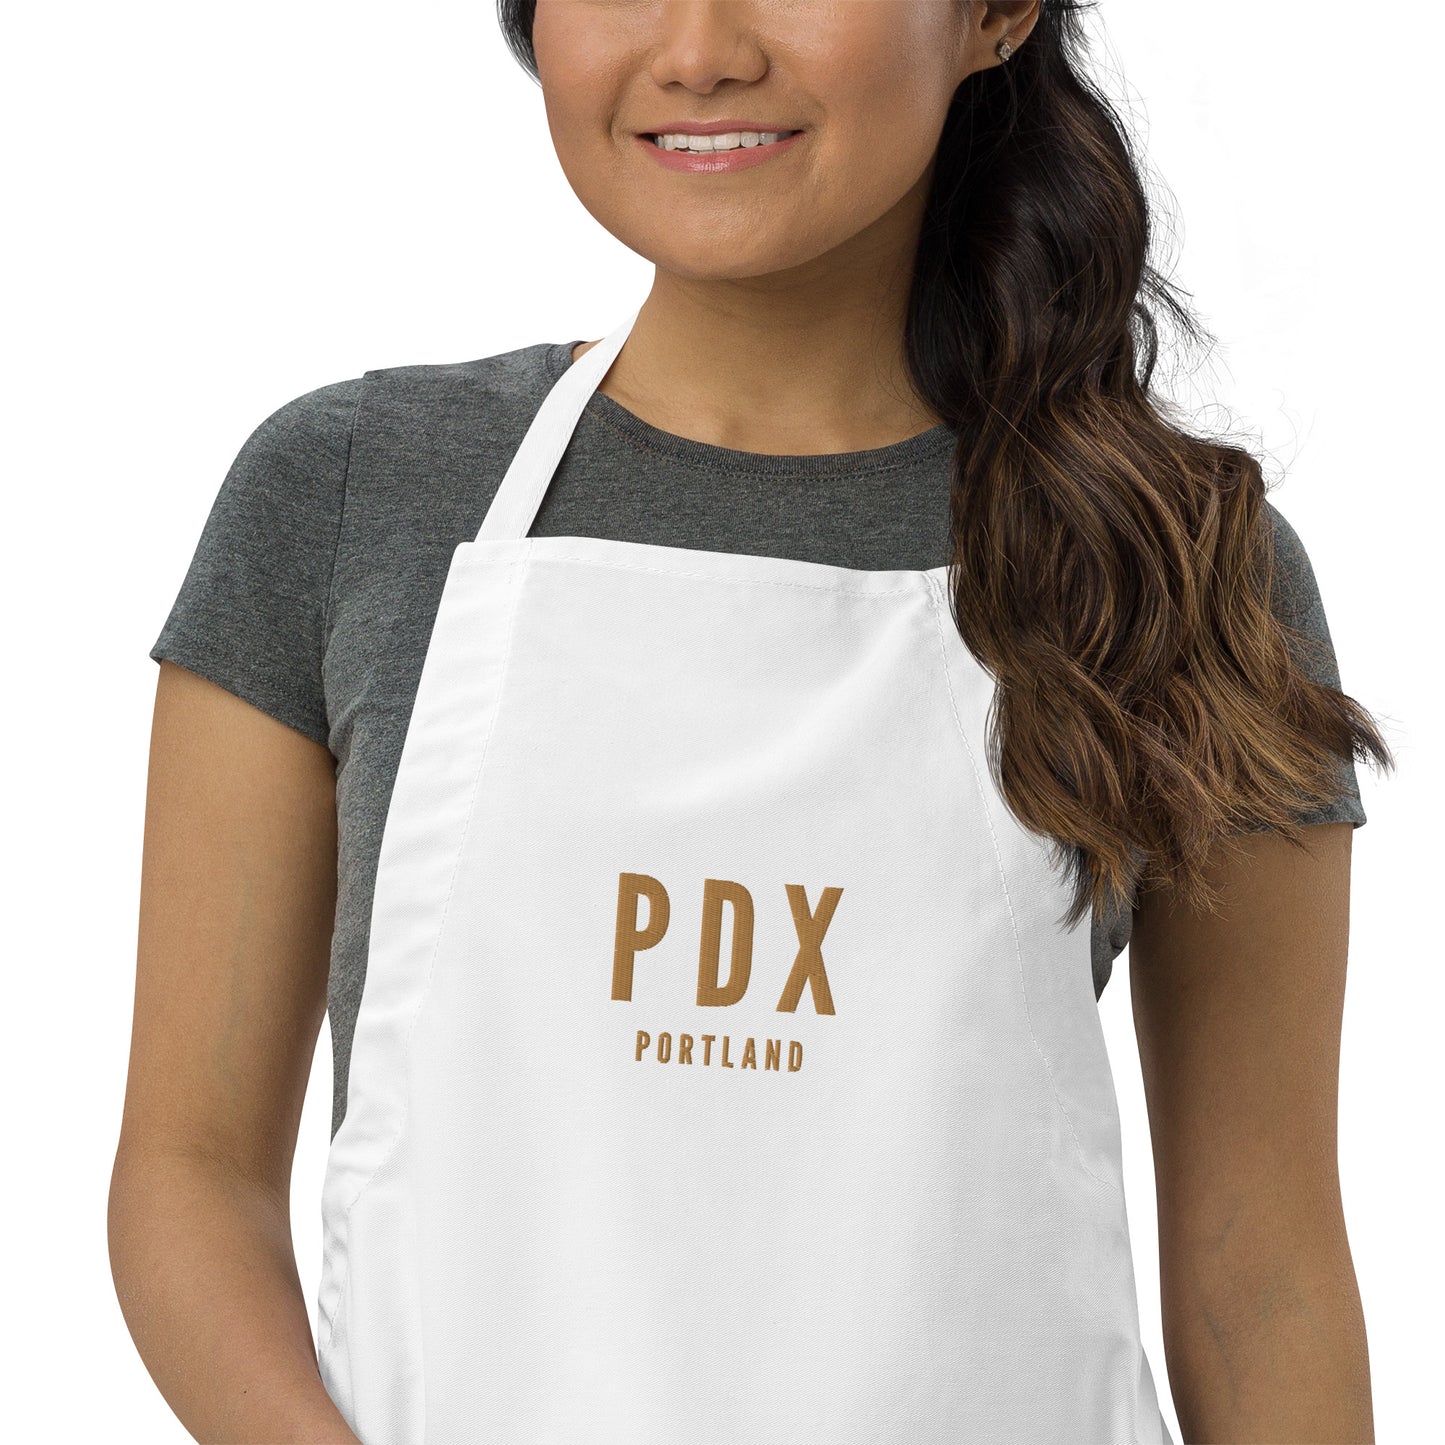 City Embroidered Apron - Old Gold • PDX Portland • YHM Designs - Image 08